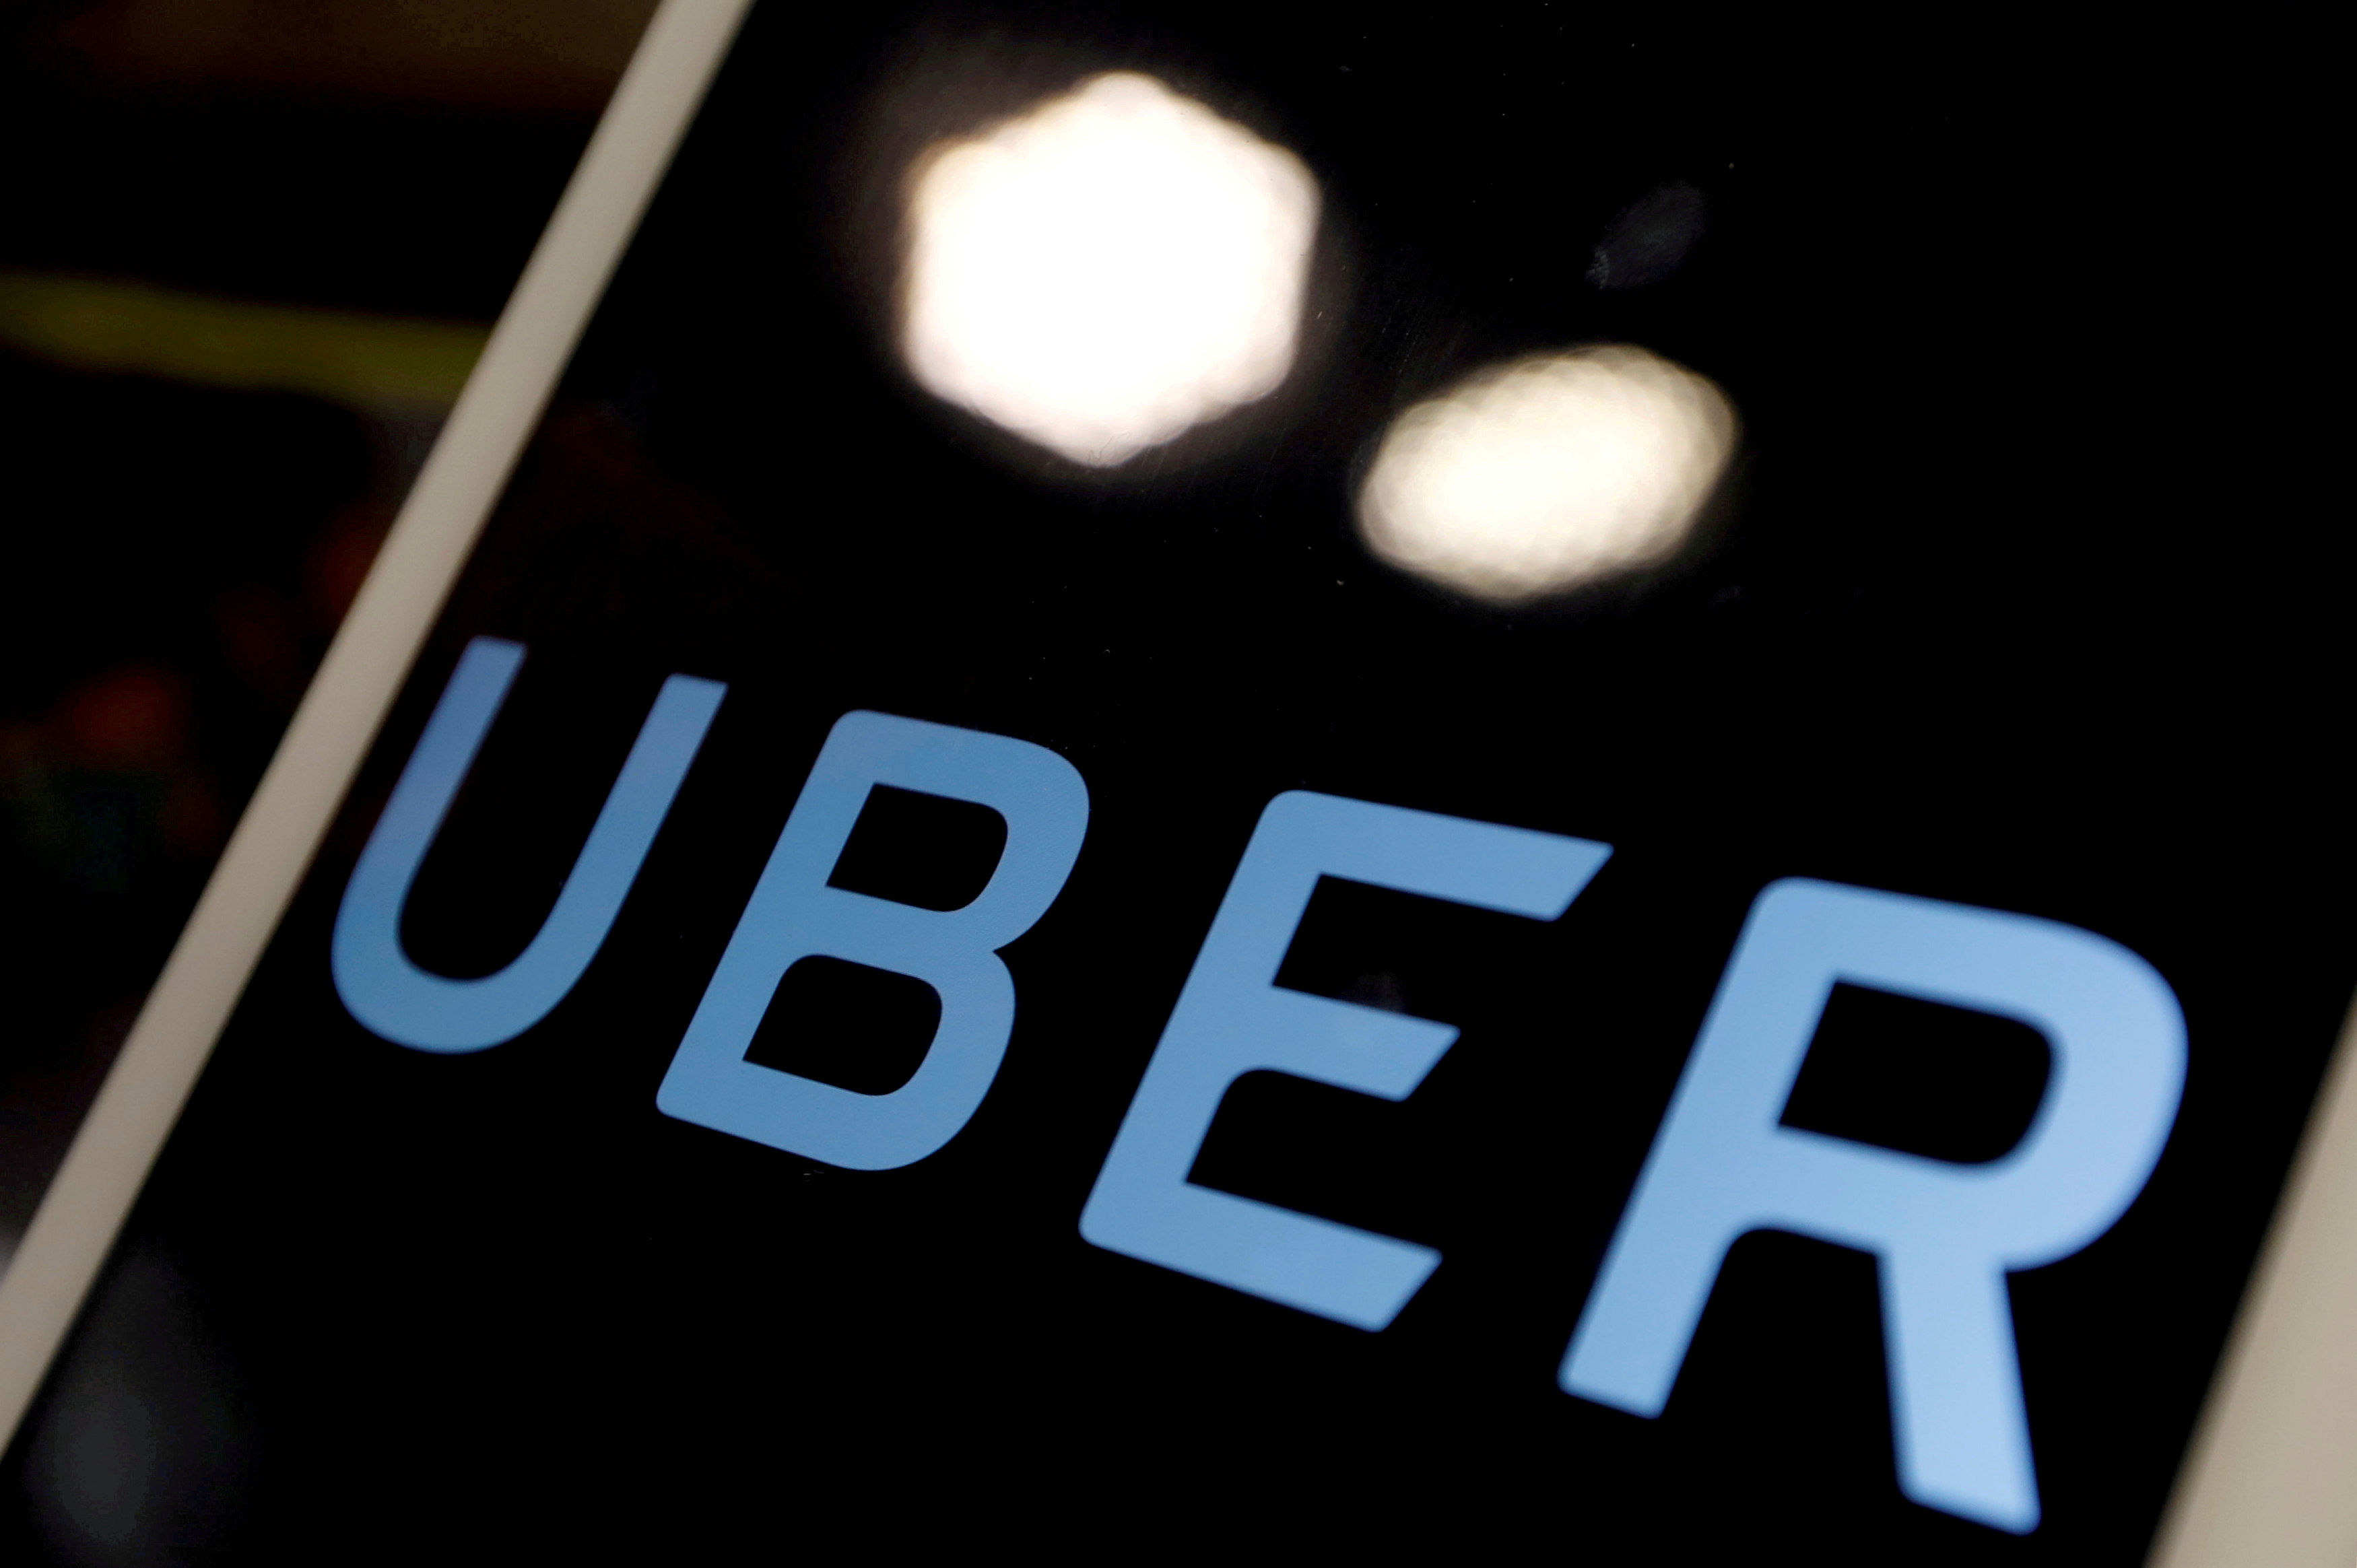 The logo of Uber is seen on an iPad, during a news conference to announce Uber resumes ride-hailing service, in Taipei, Taiwan. (Reuters Photo)